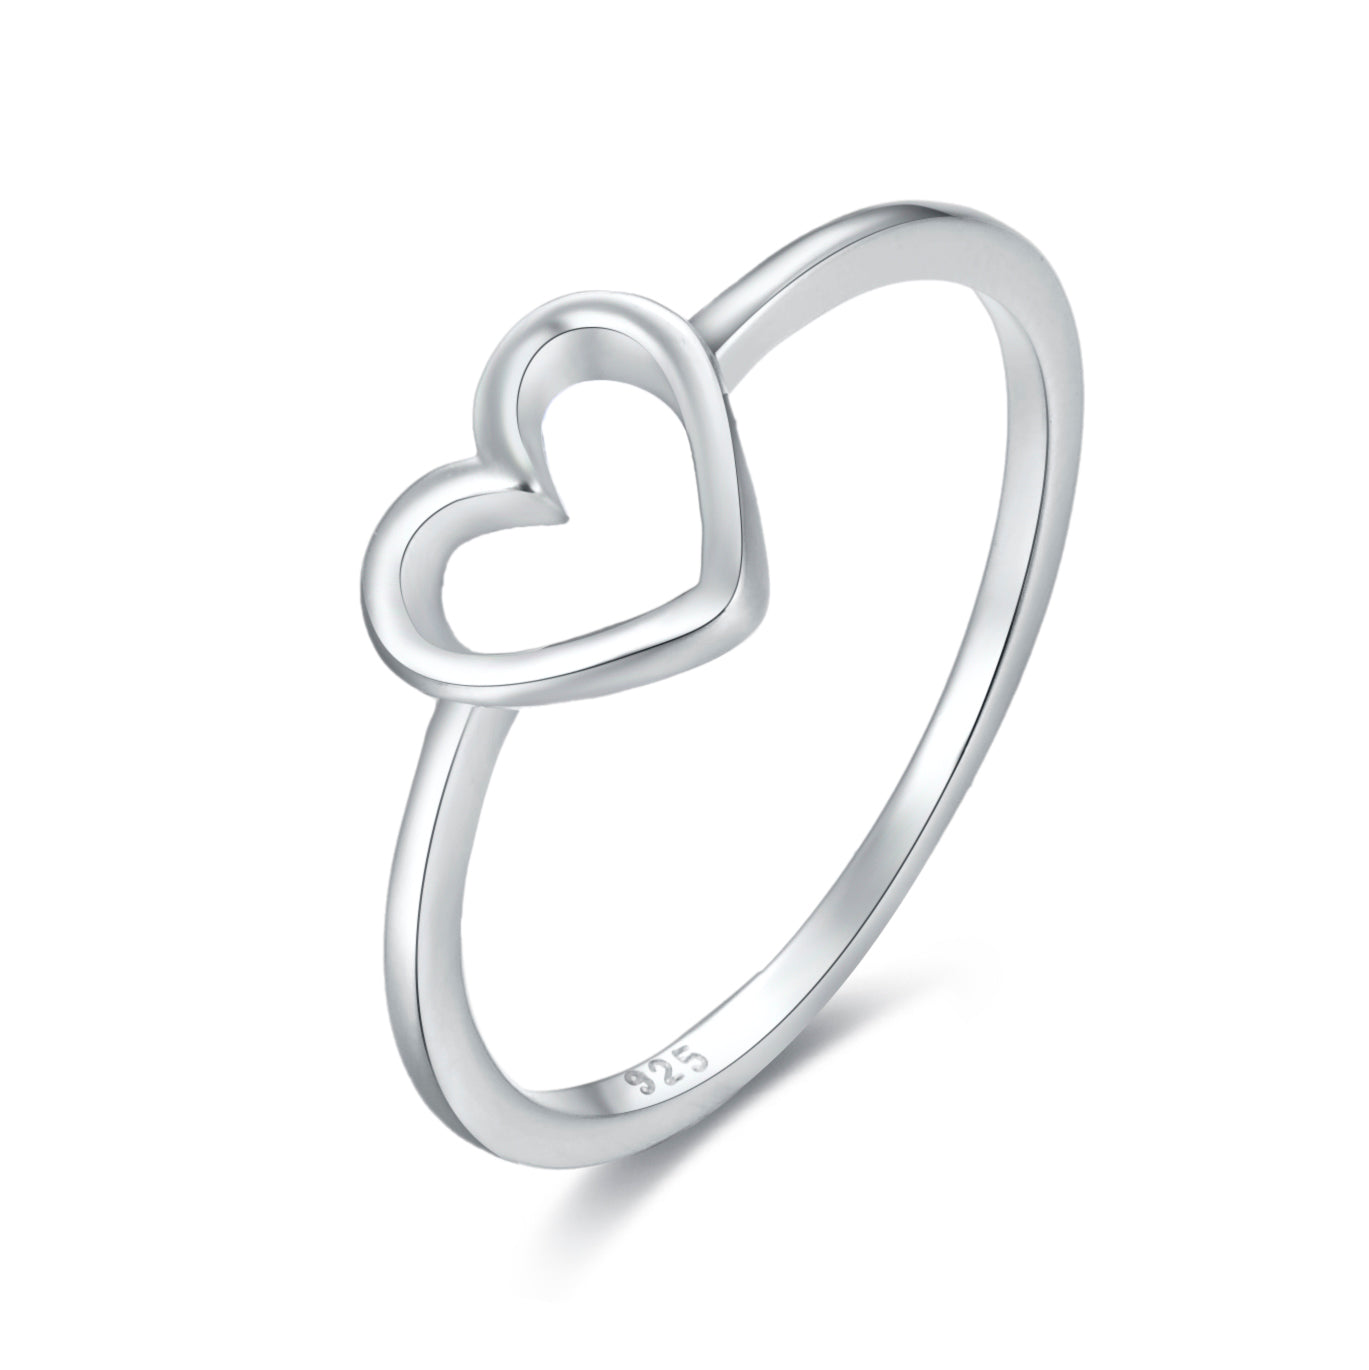 AD Beads 925 Sterling Silver Heart Ring Size #6, #7,#8, #9 for Women,